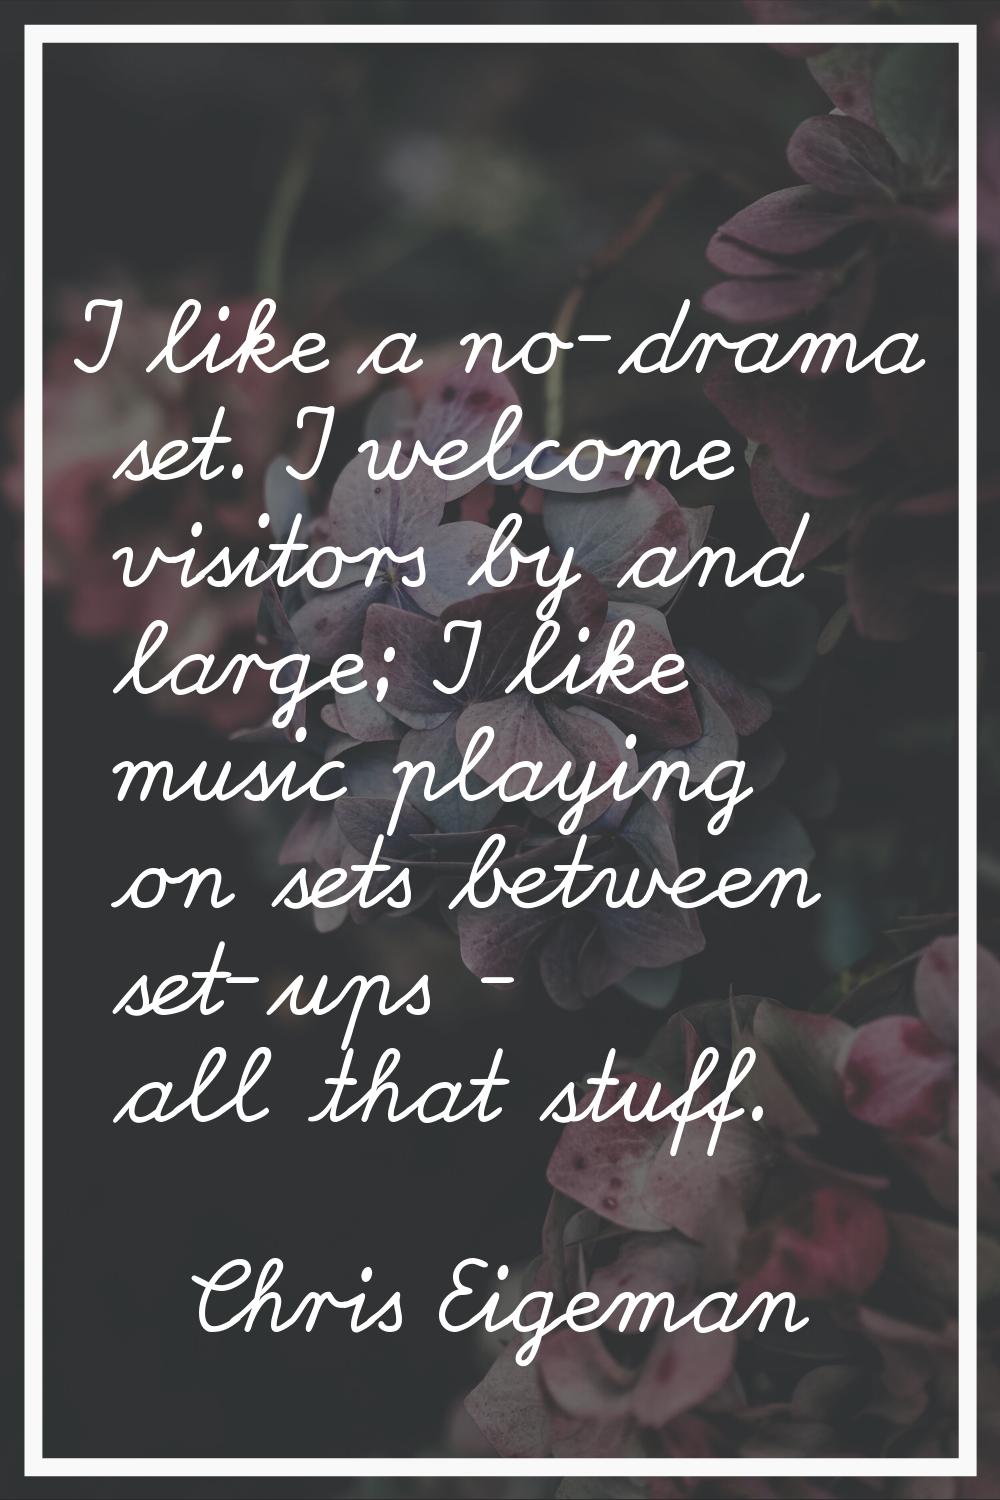 I like a no-drama set. I welcome visitors by and large; I like music playing on sets between set-up